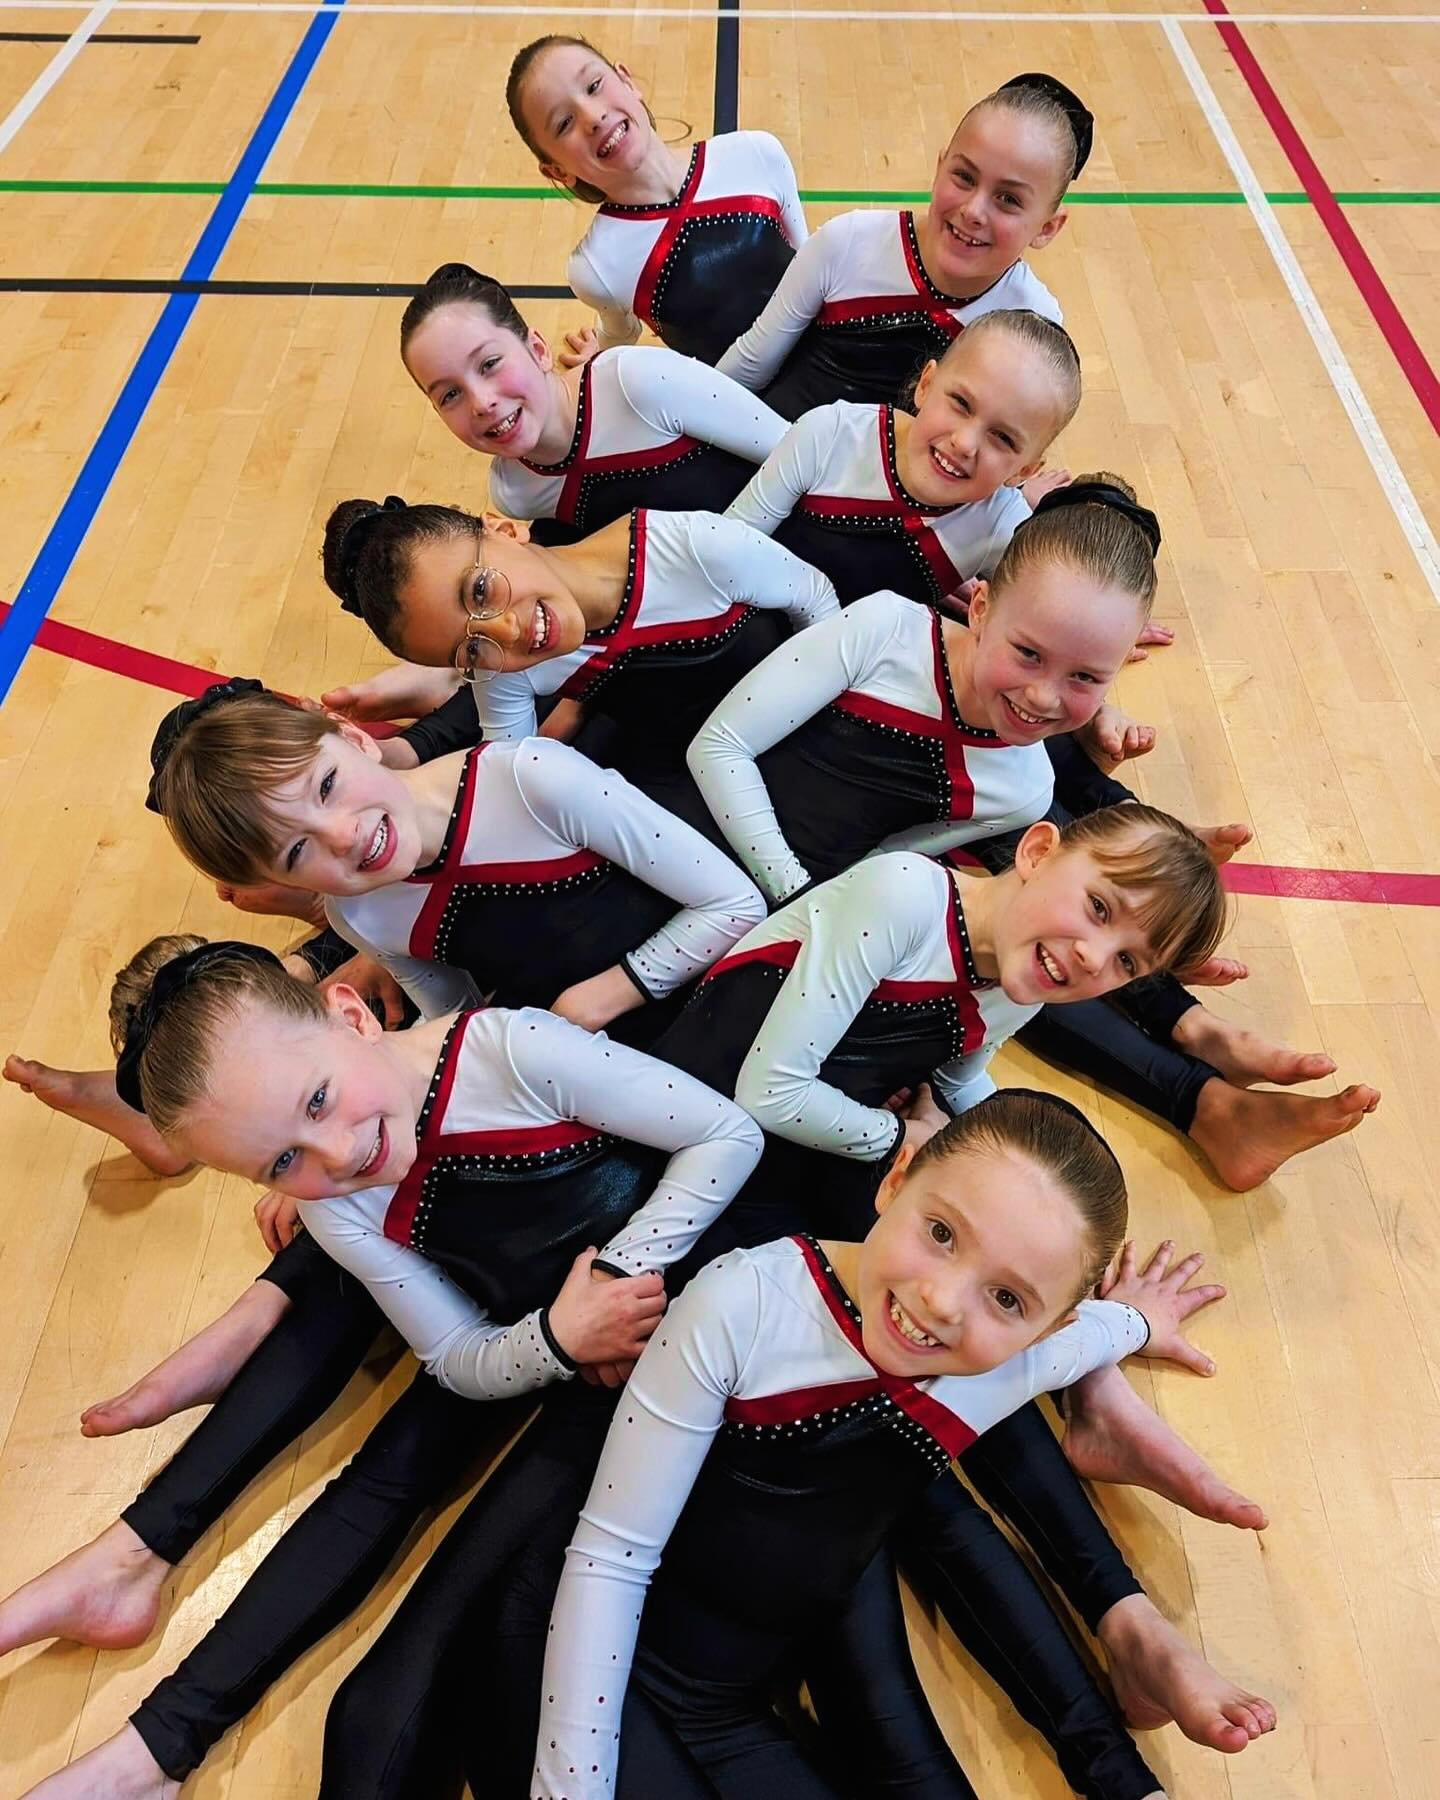 Last weekend 10 gymnastics teams from Bracknell competed in the British Qualification Event in Eastleigh to decided what teams will qualify for the finals. Qualification will be announced by British Gymnastics next week. 

Bracknell Teams are named a